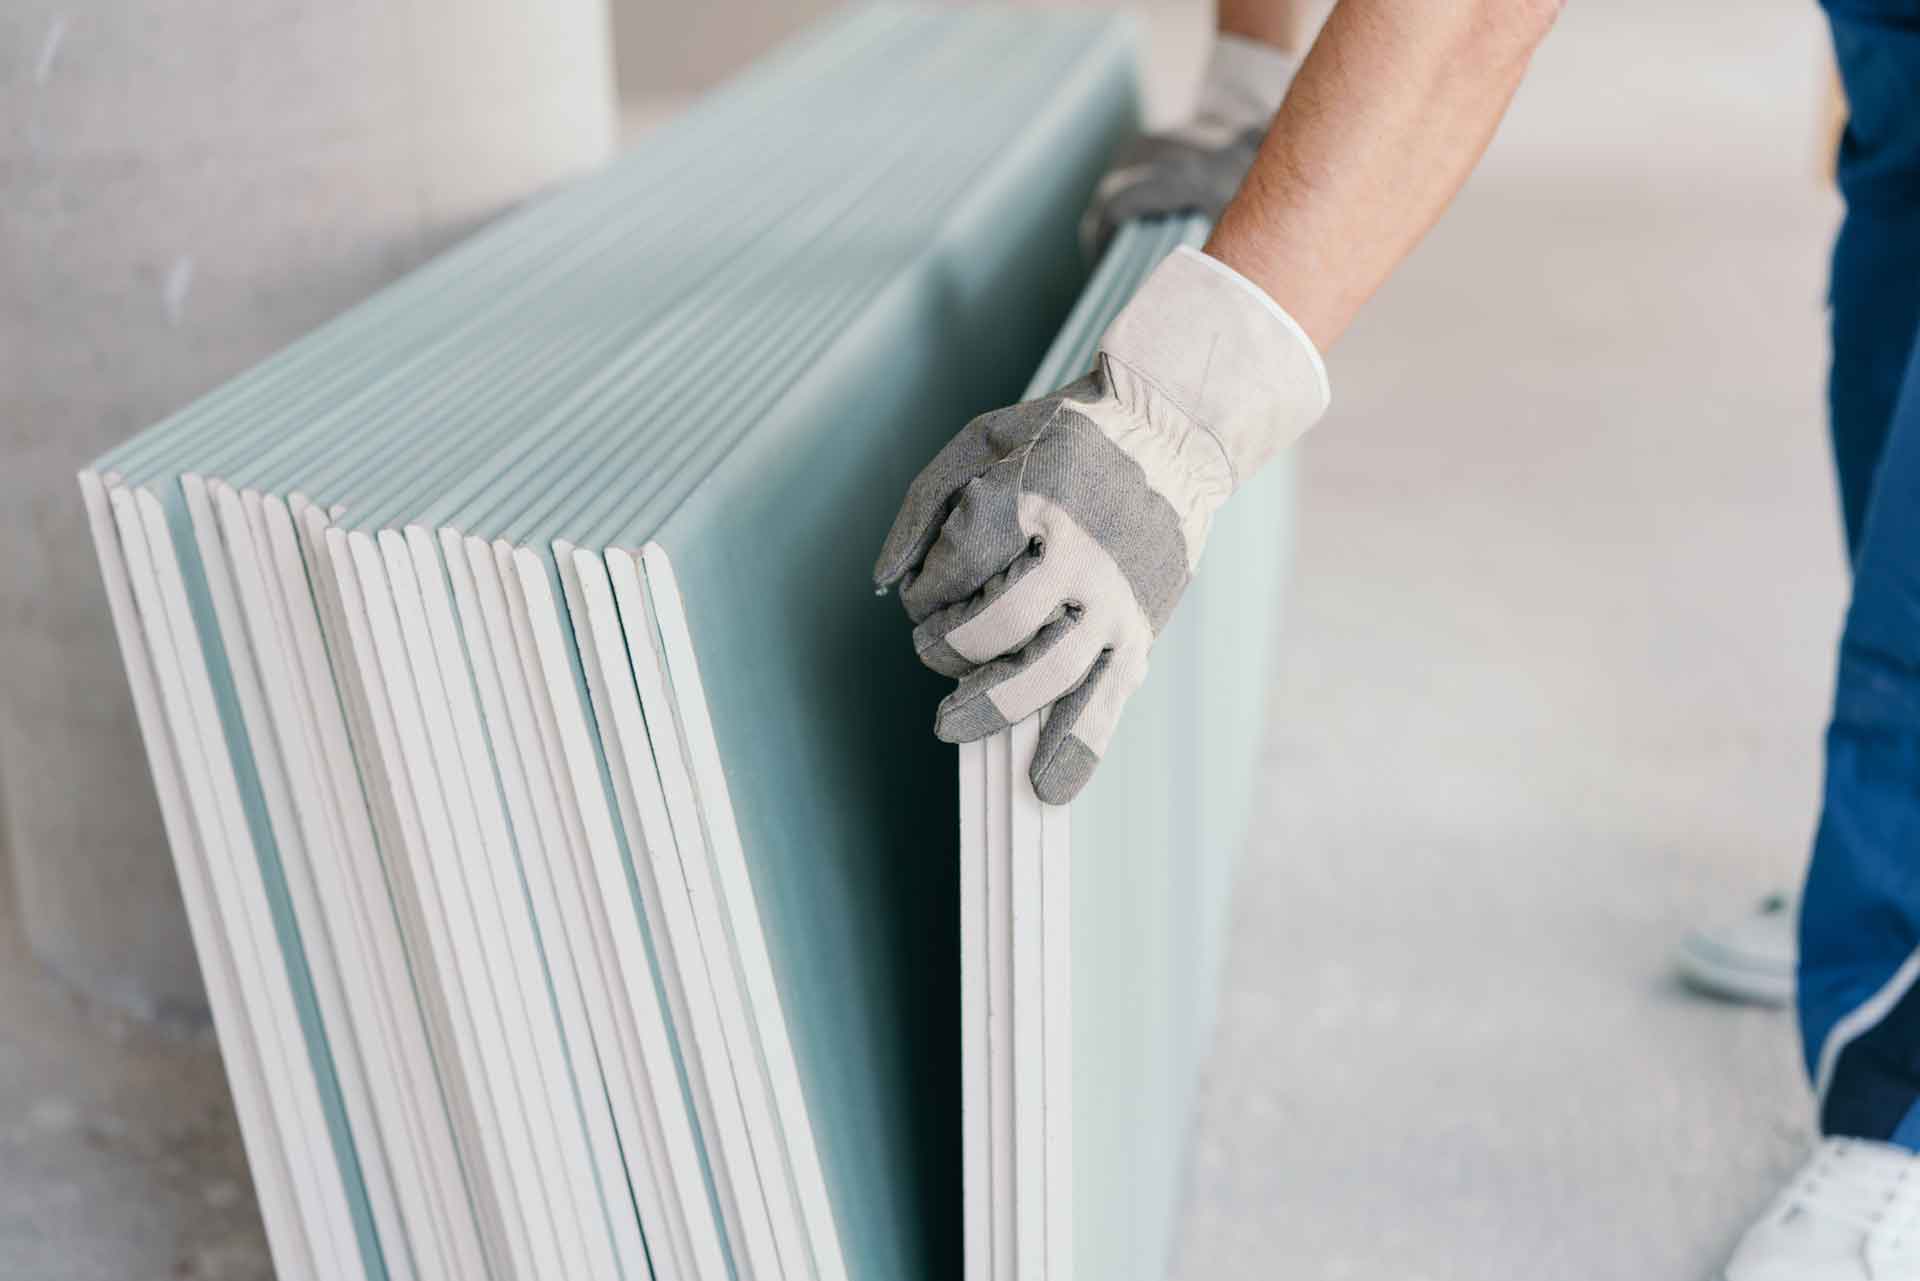 Gloved hands moving several sheets of drywall